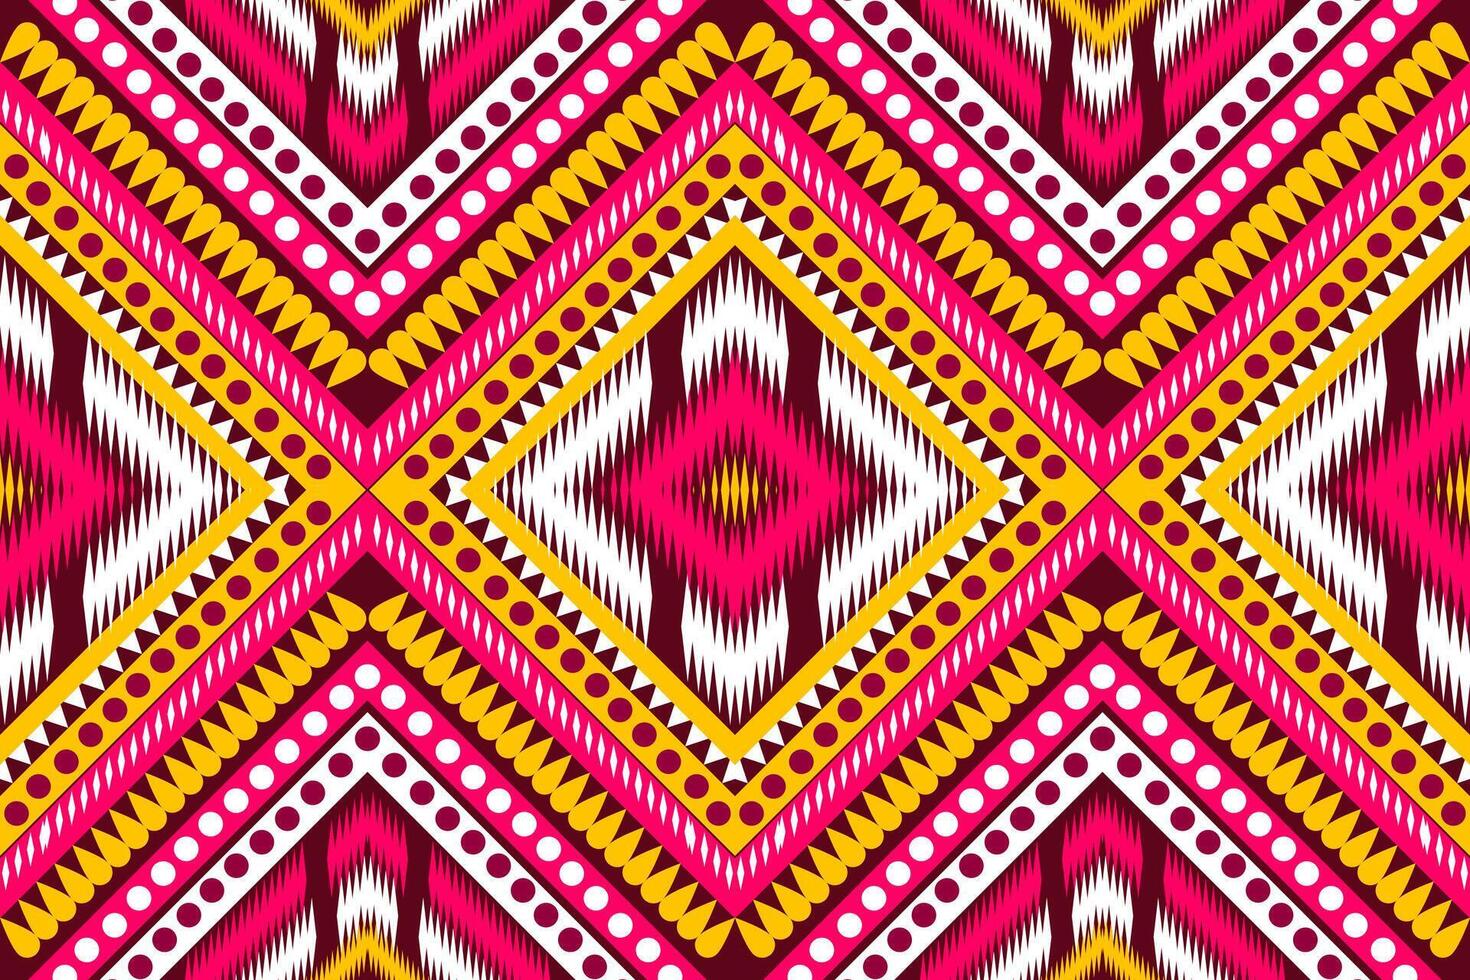 Aztec tribal geometric vector background in black red yellow white Seamless stripe pattern. Traditional ornament ethnic style. Design for textile, fabric, clothing, curtain, rug, ornament, wrapping.